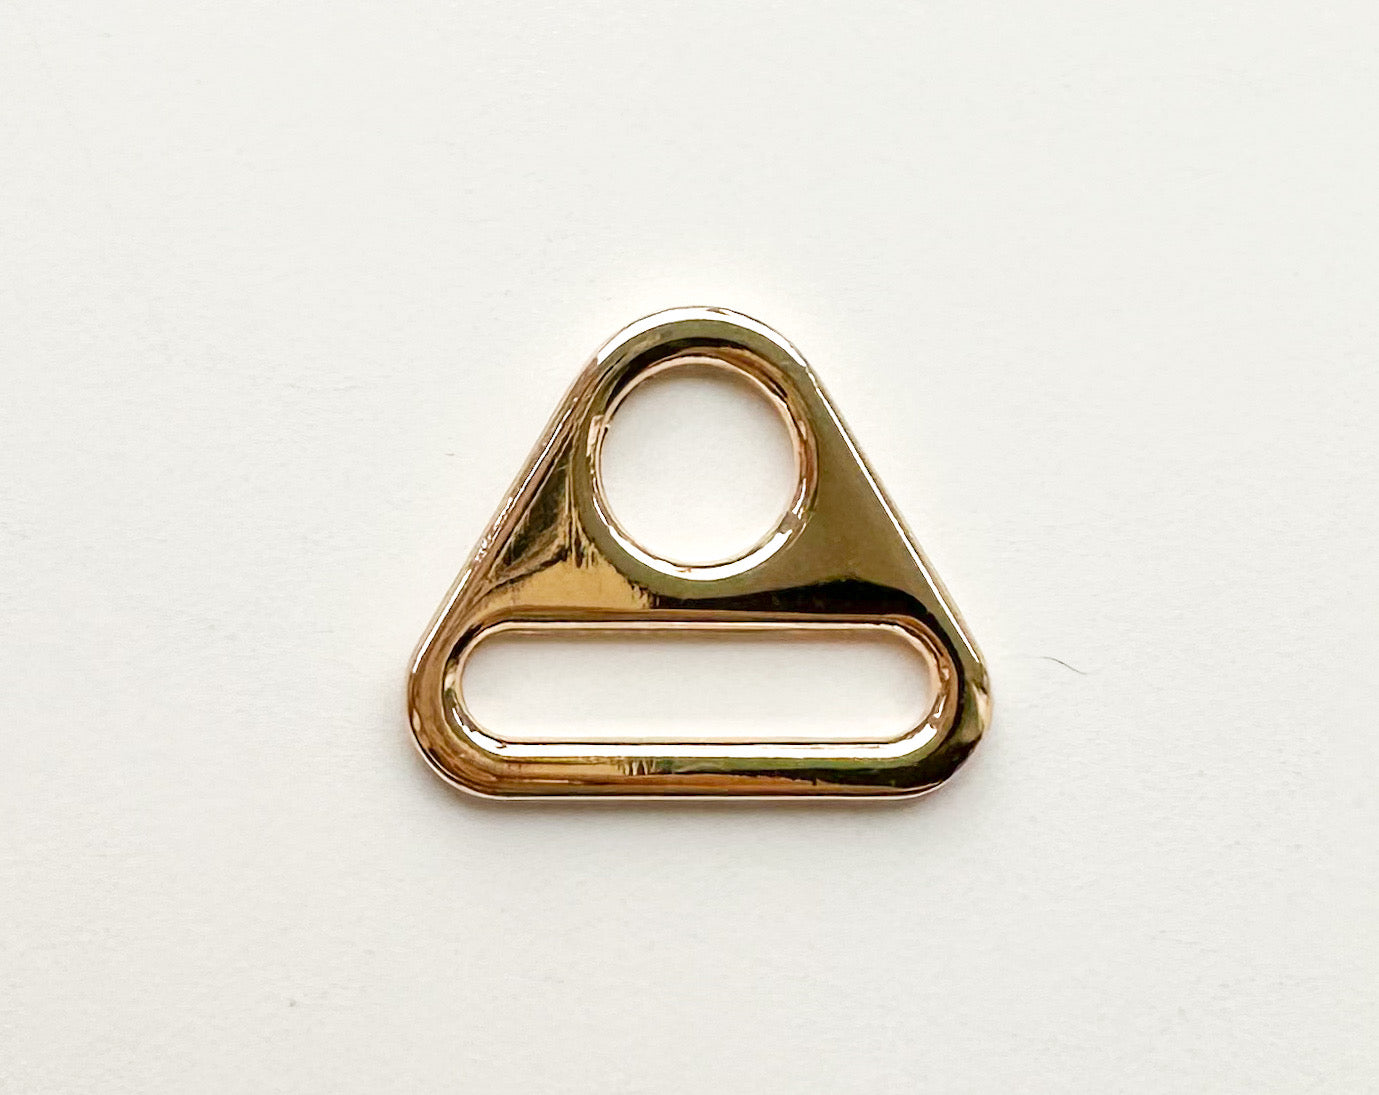 Triangle rings size: 1” (25mm)